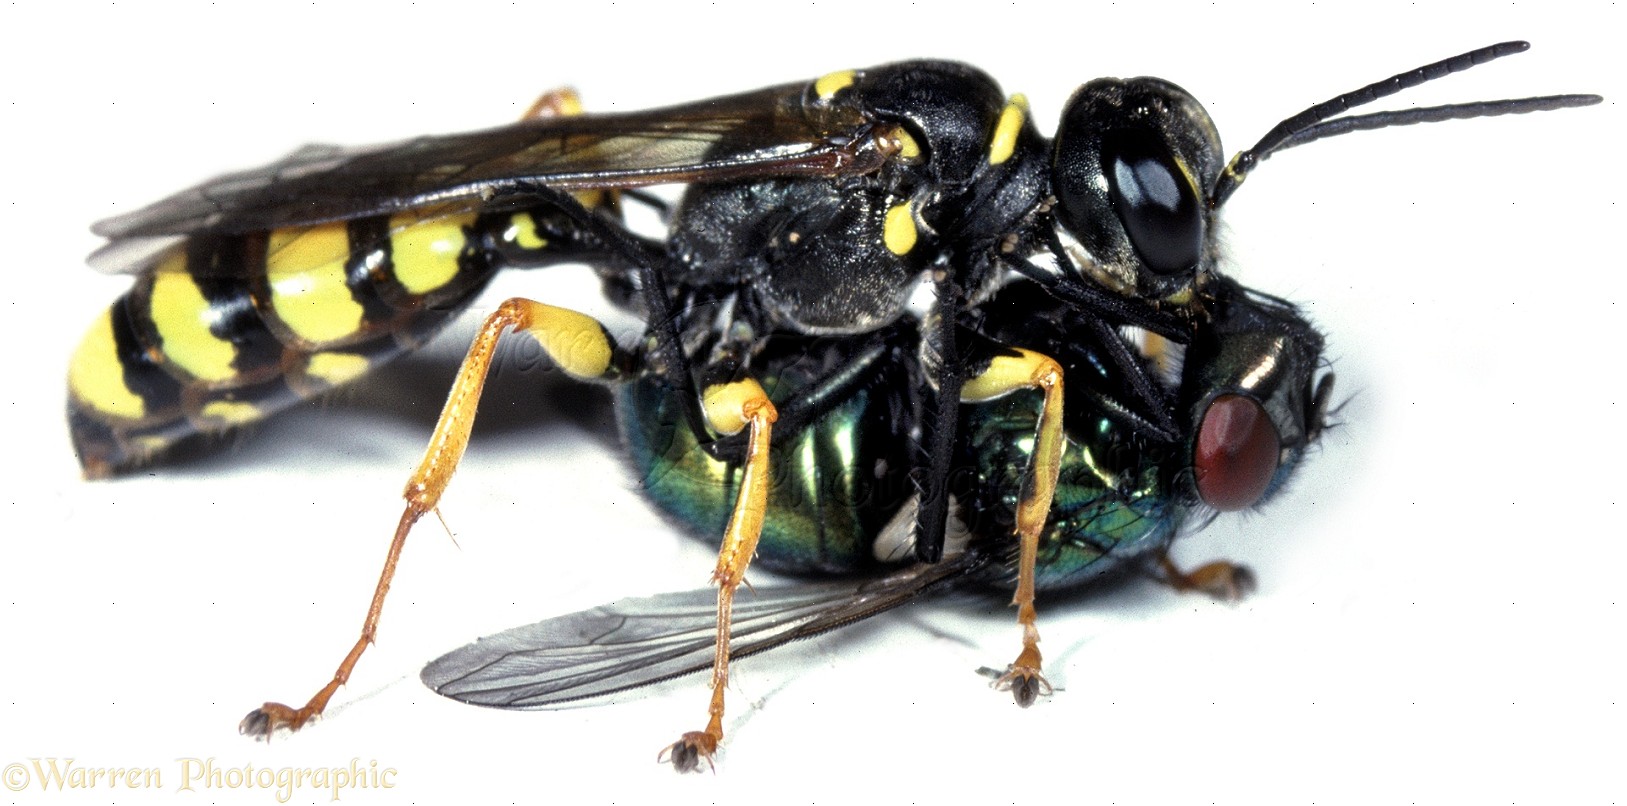 [Image: 06389-Digger-wasp-with-a-fly-white-background.jpg]